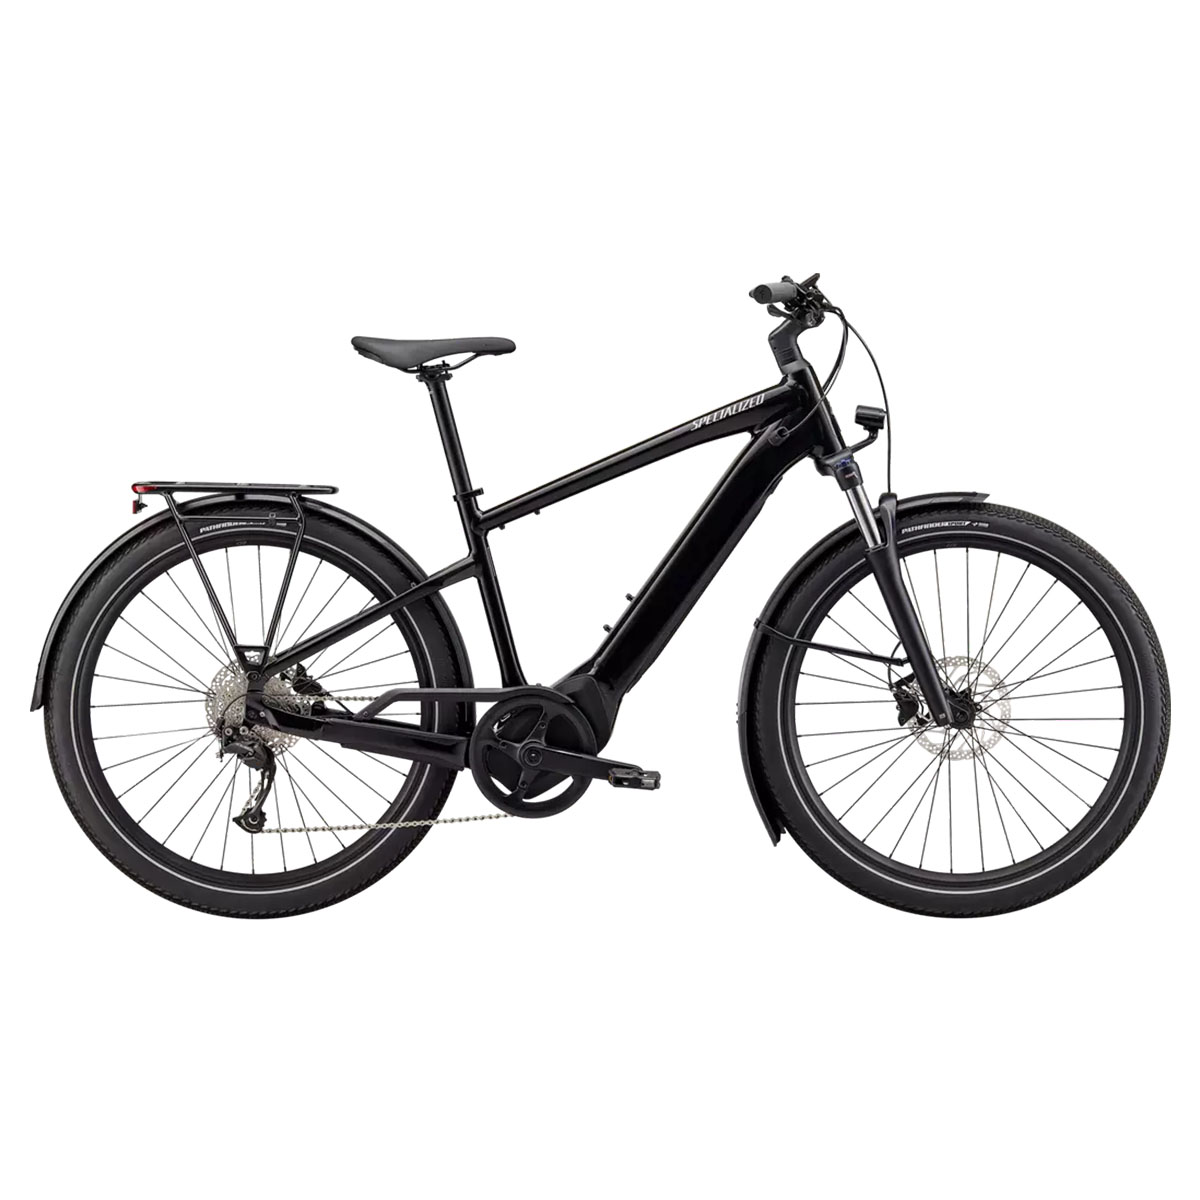 SPECIALIZED VADO 3.0 NOIR/ARGENT SMALL